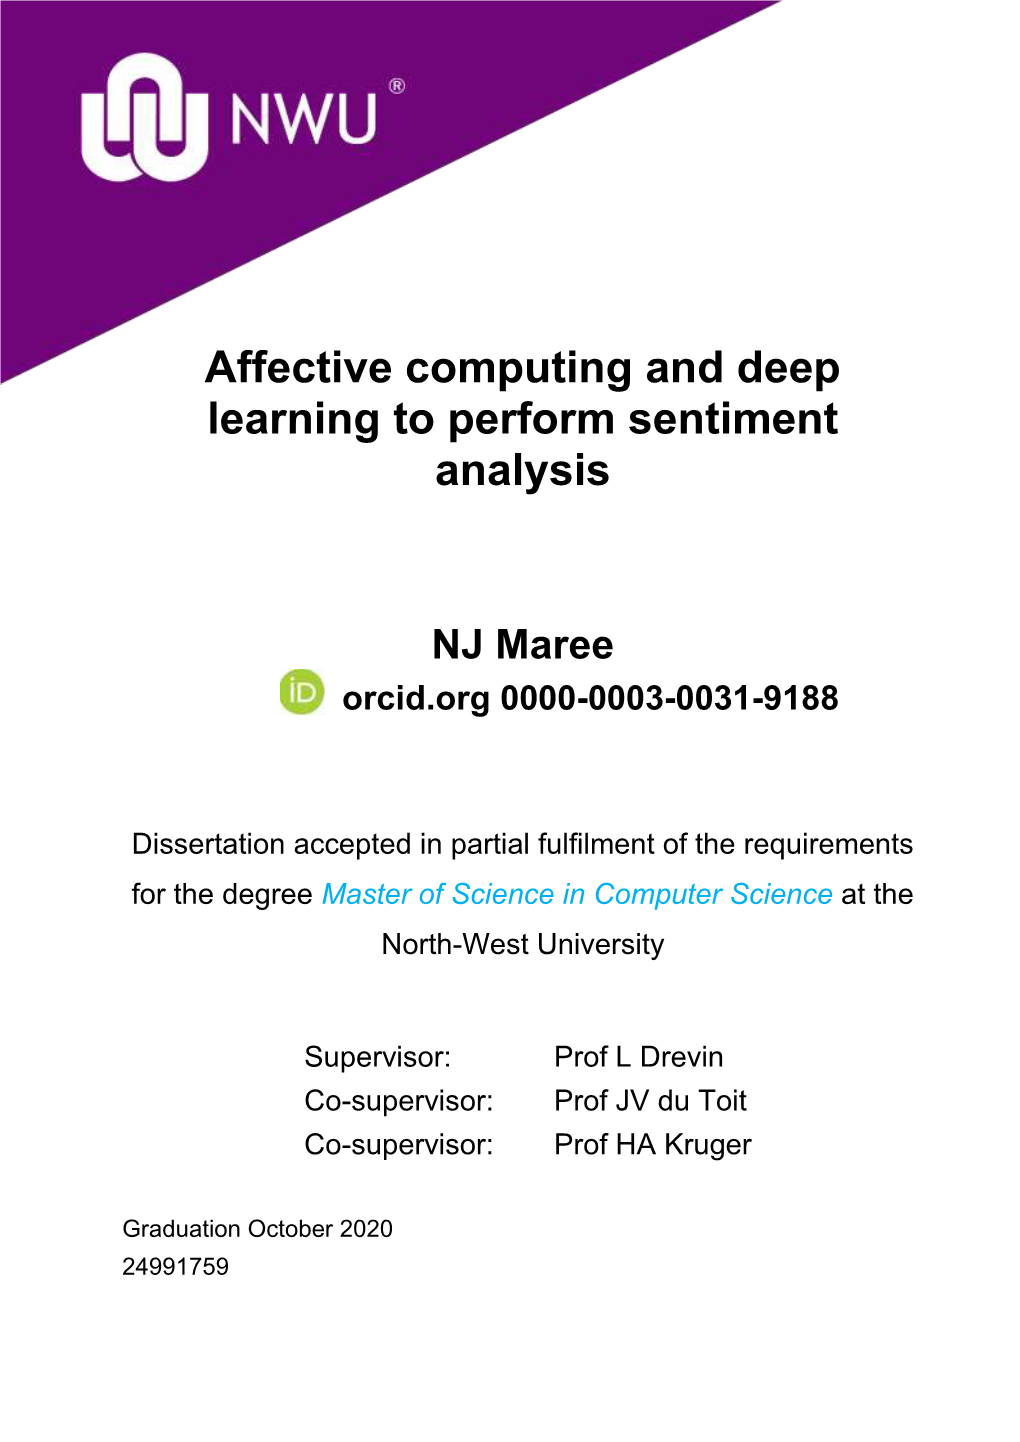 Affective Computing and Deep Learning to Perform Sentiment Analysis